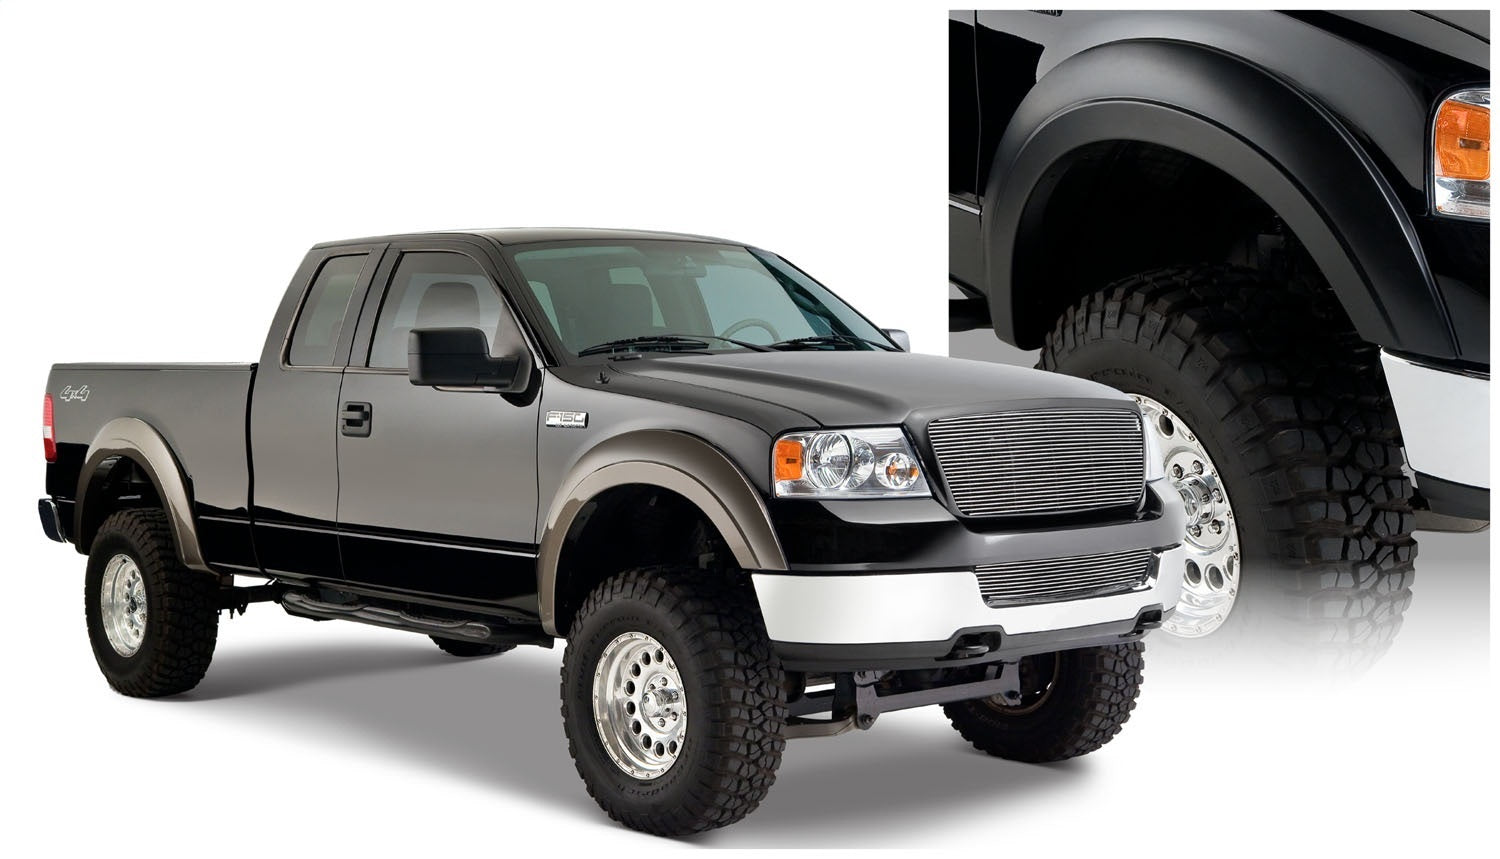 Bushwacker 20915-02 Black Extend-A-Fender Style Smooth Finish 4-Piece Fender Flare Set for 2004-2008 Ford F-150